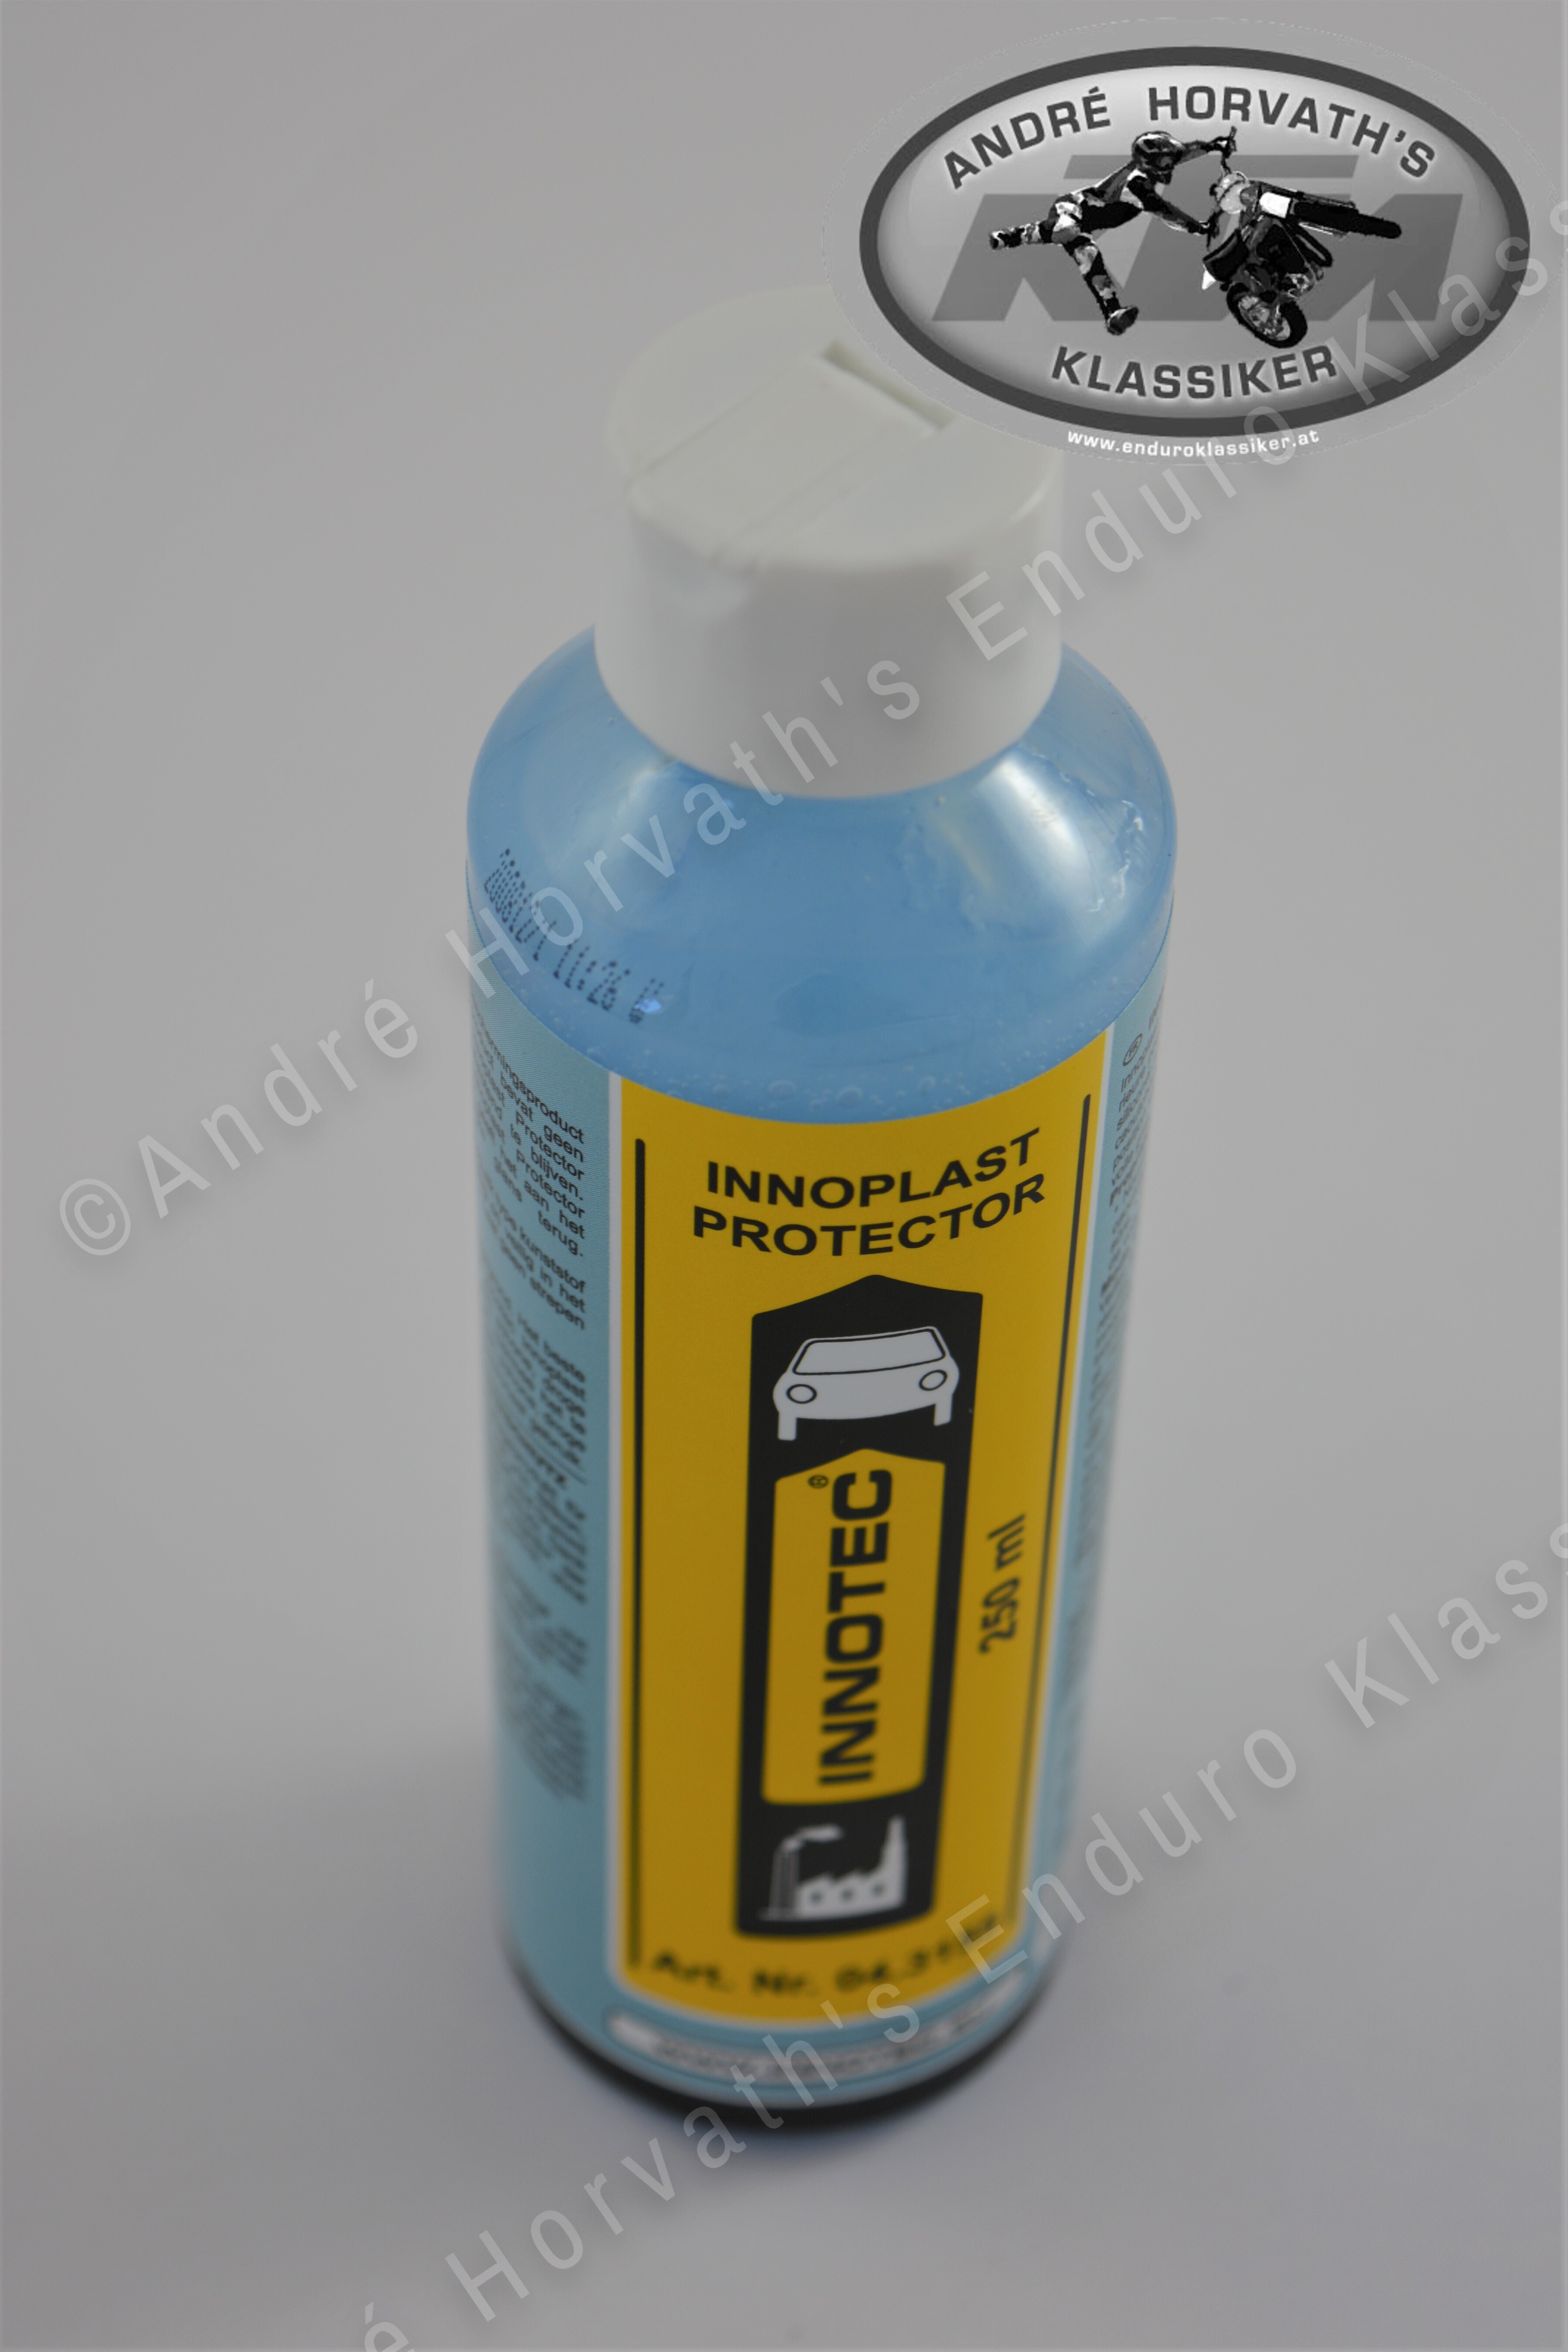 Innotec Innoplast Protector, 250ml bottle, is a high grade protection  product for any type of plastic parts